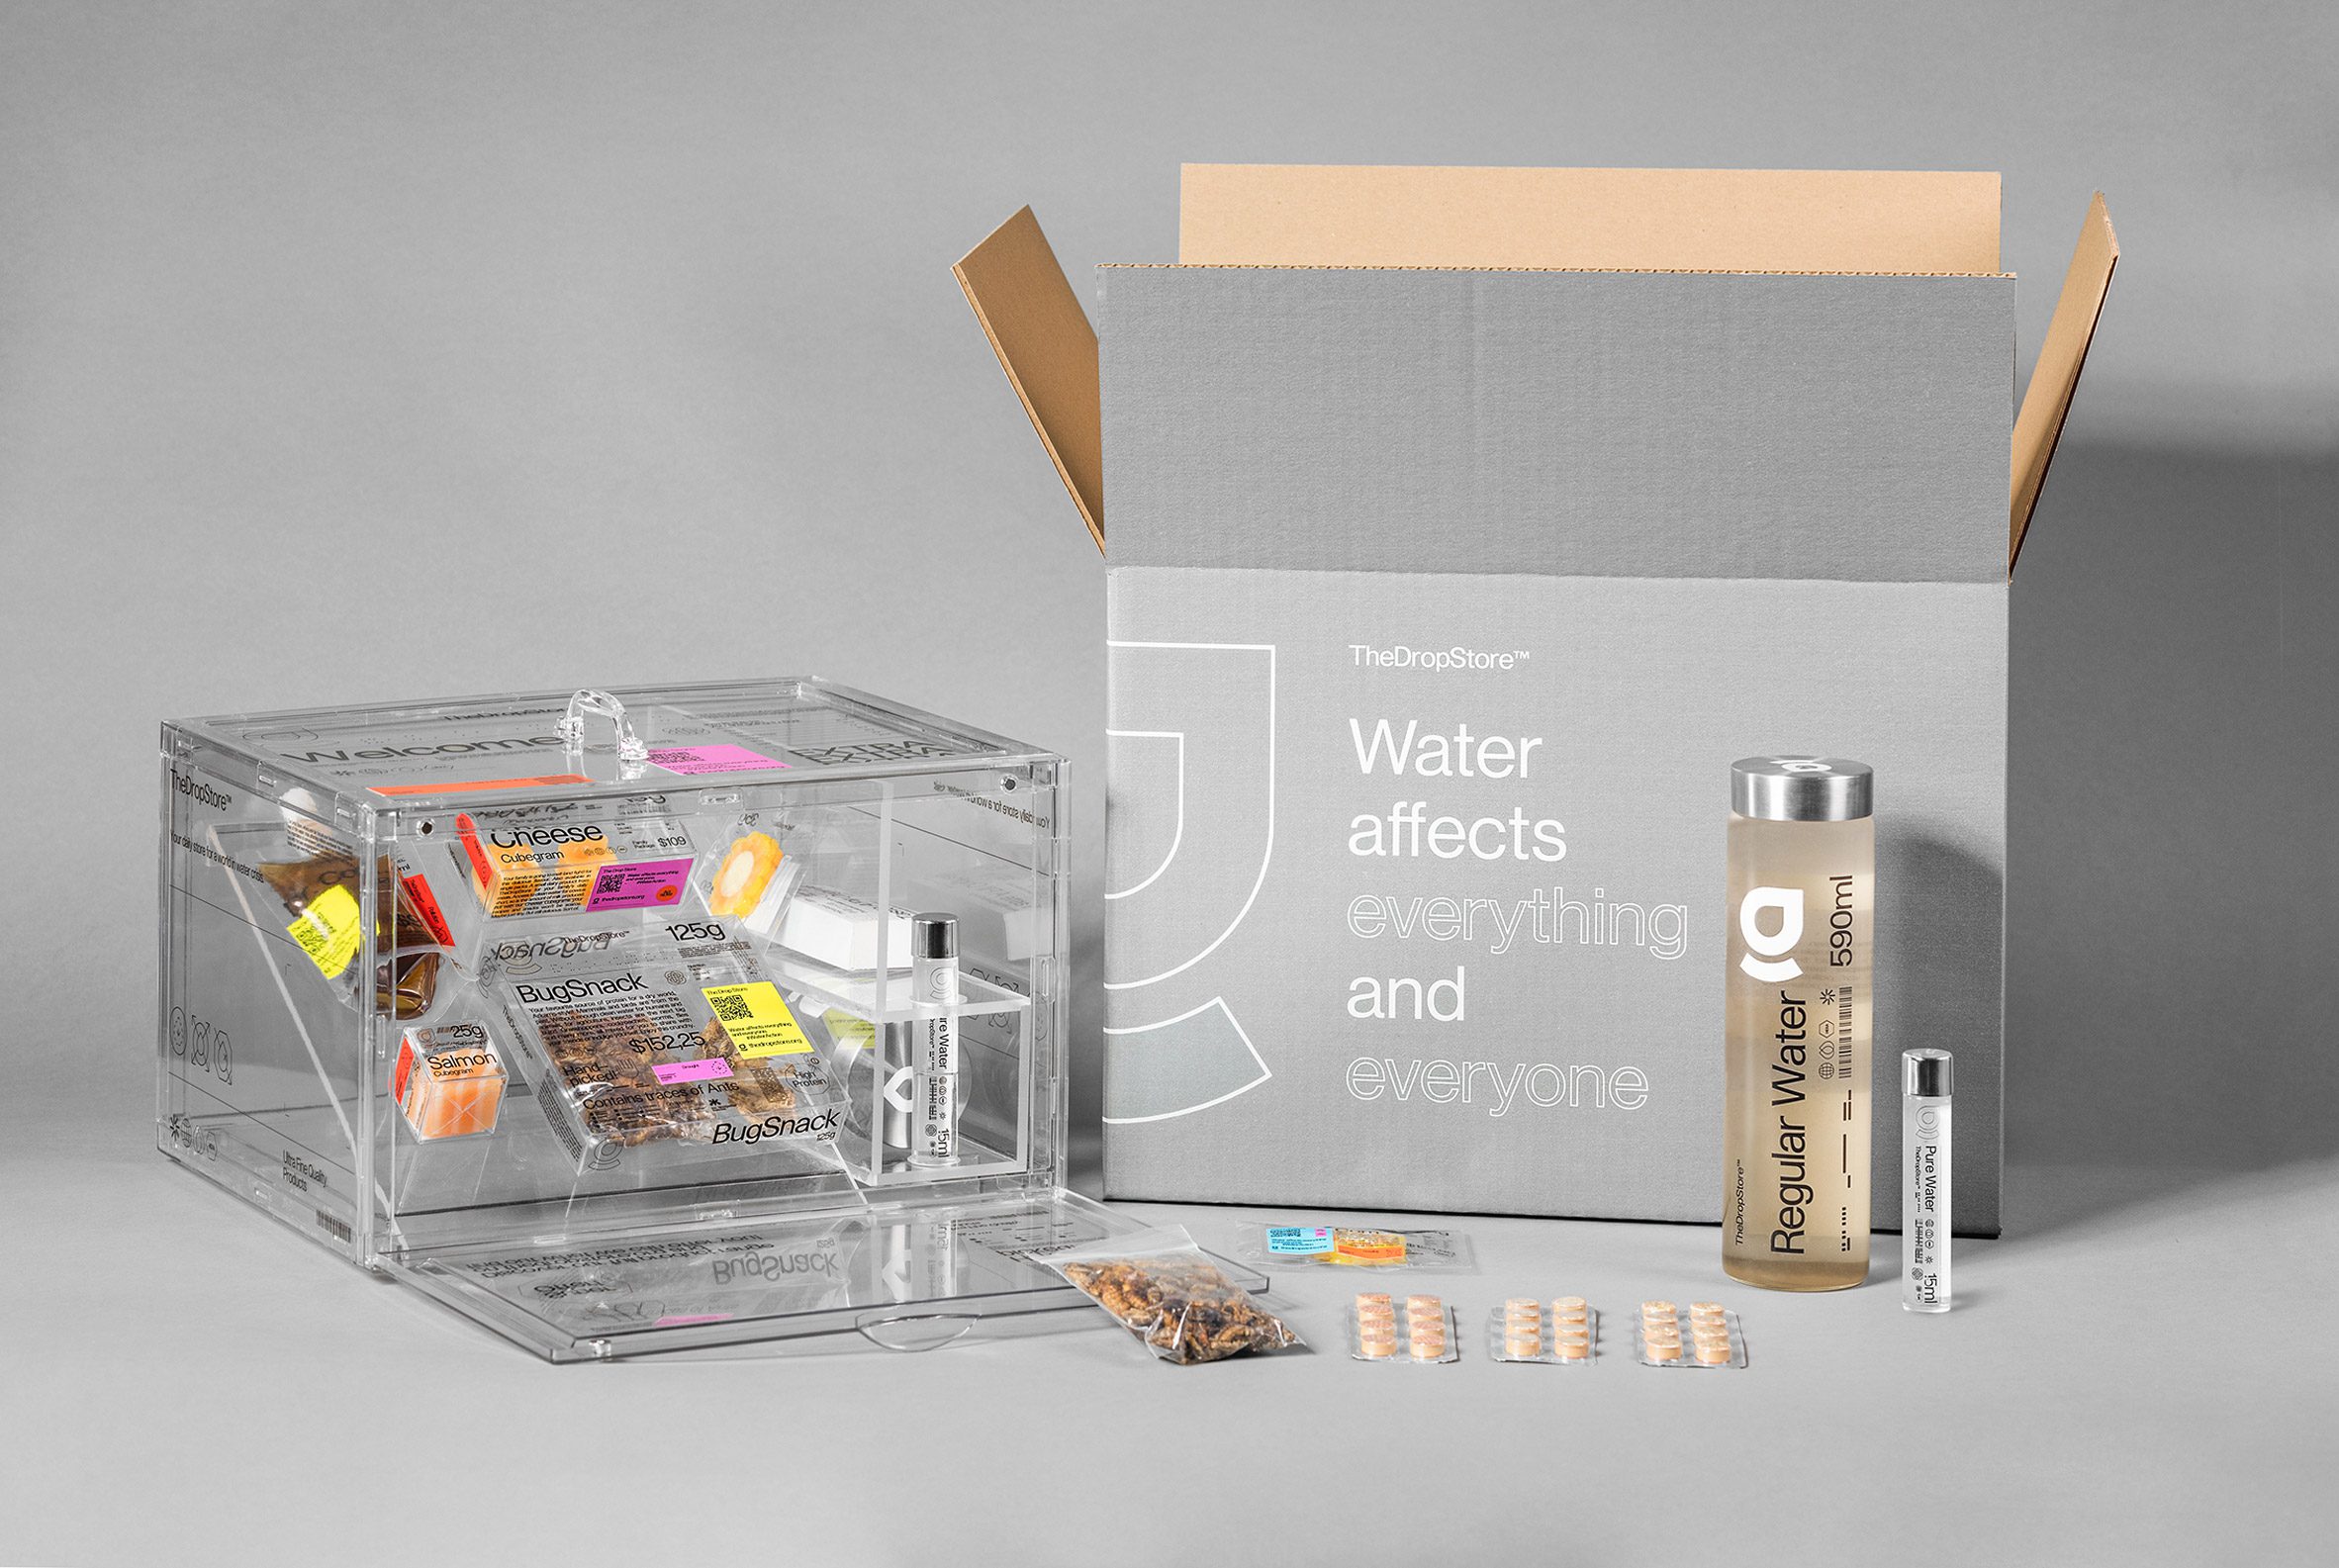 Packaging with water-scarce projects grey box